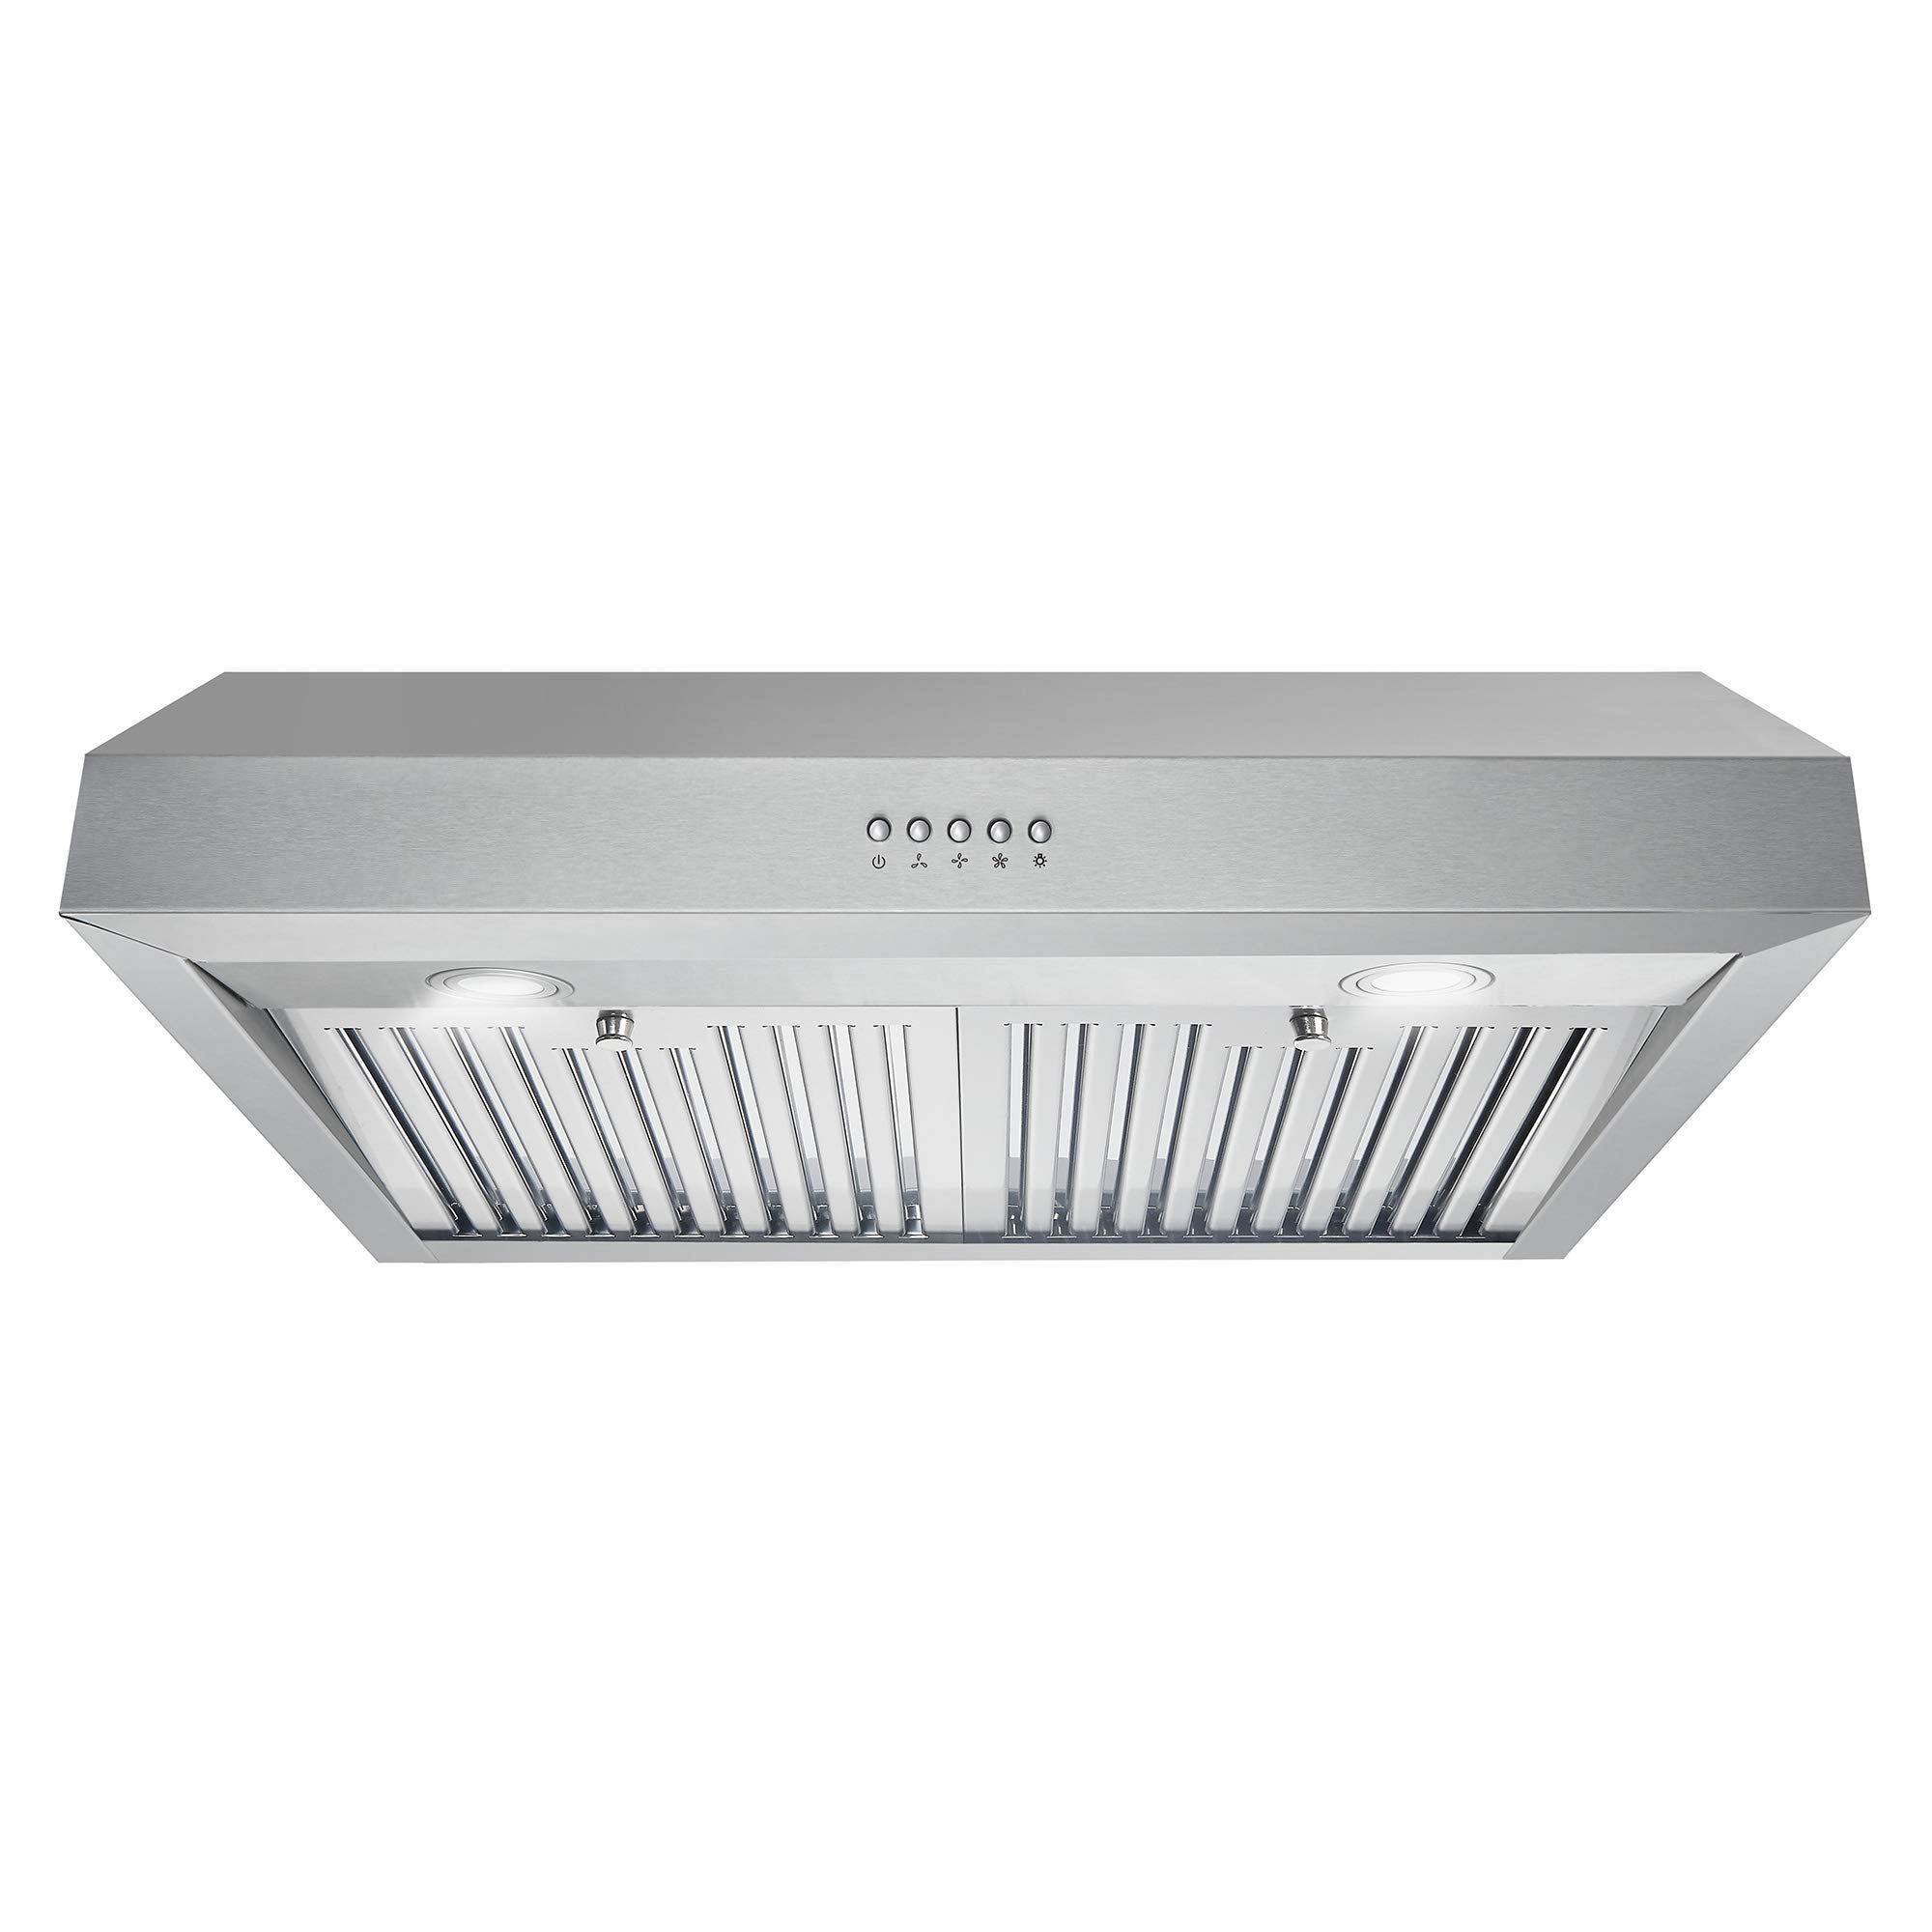 Cosmo UC30 30 in. Ducted Under Cabinet Range Hood, Kitc...